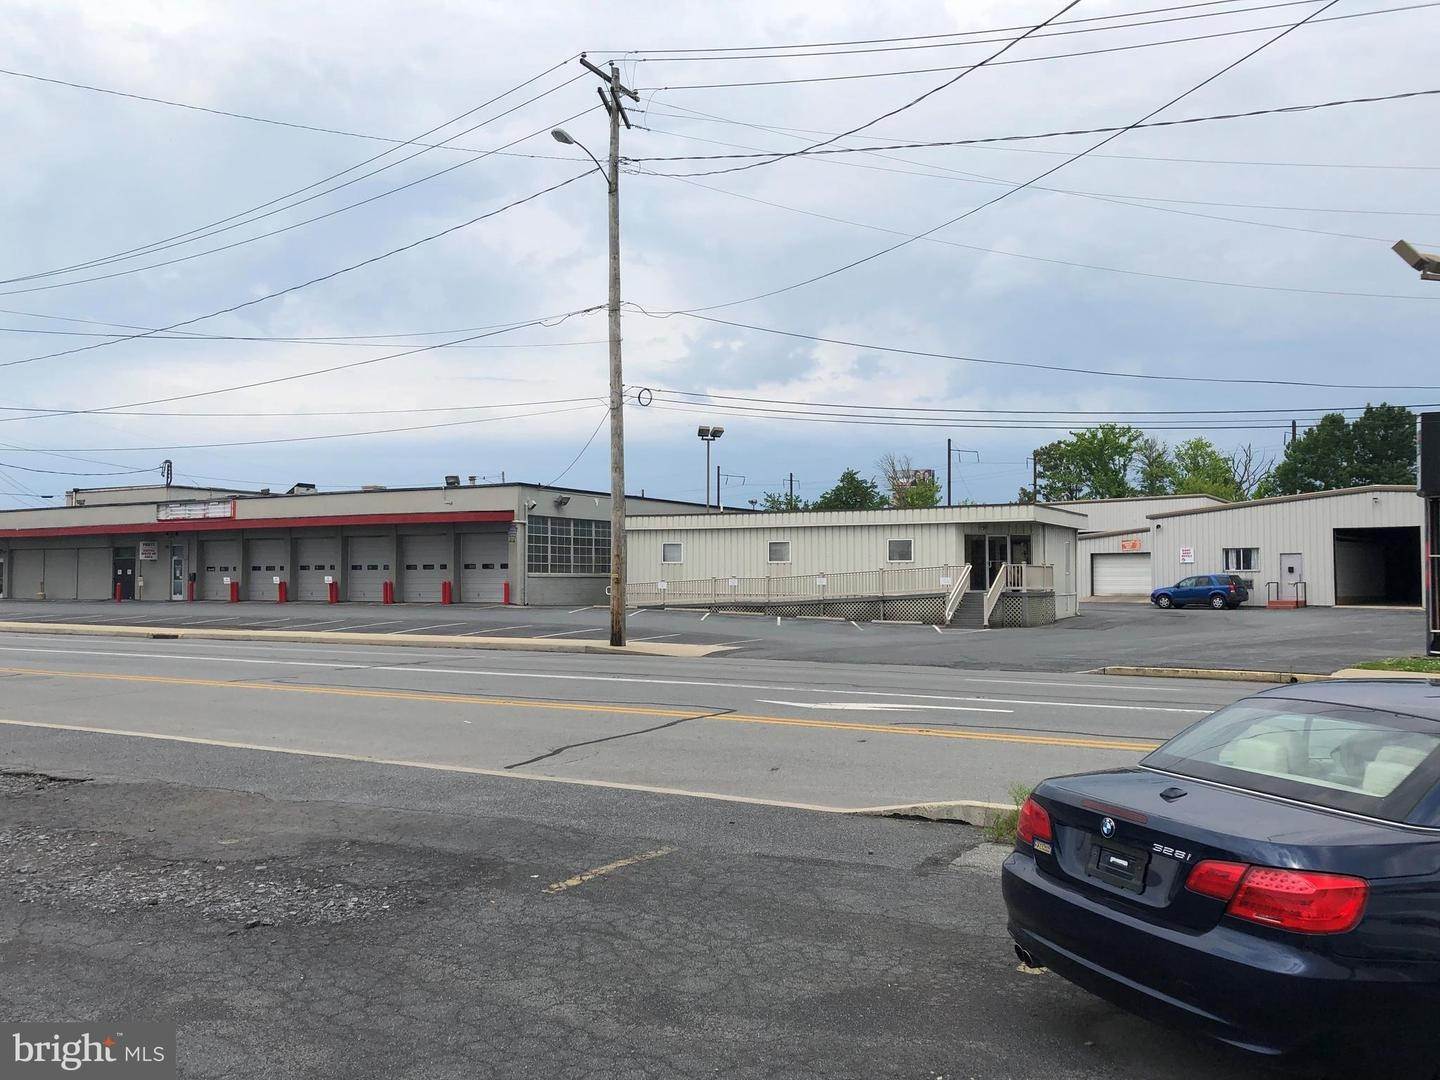 2. Commercial at 1009 N PRINCE ST #BUILDING 2 Lancaster, Pennsylvania 17603 United States